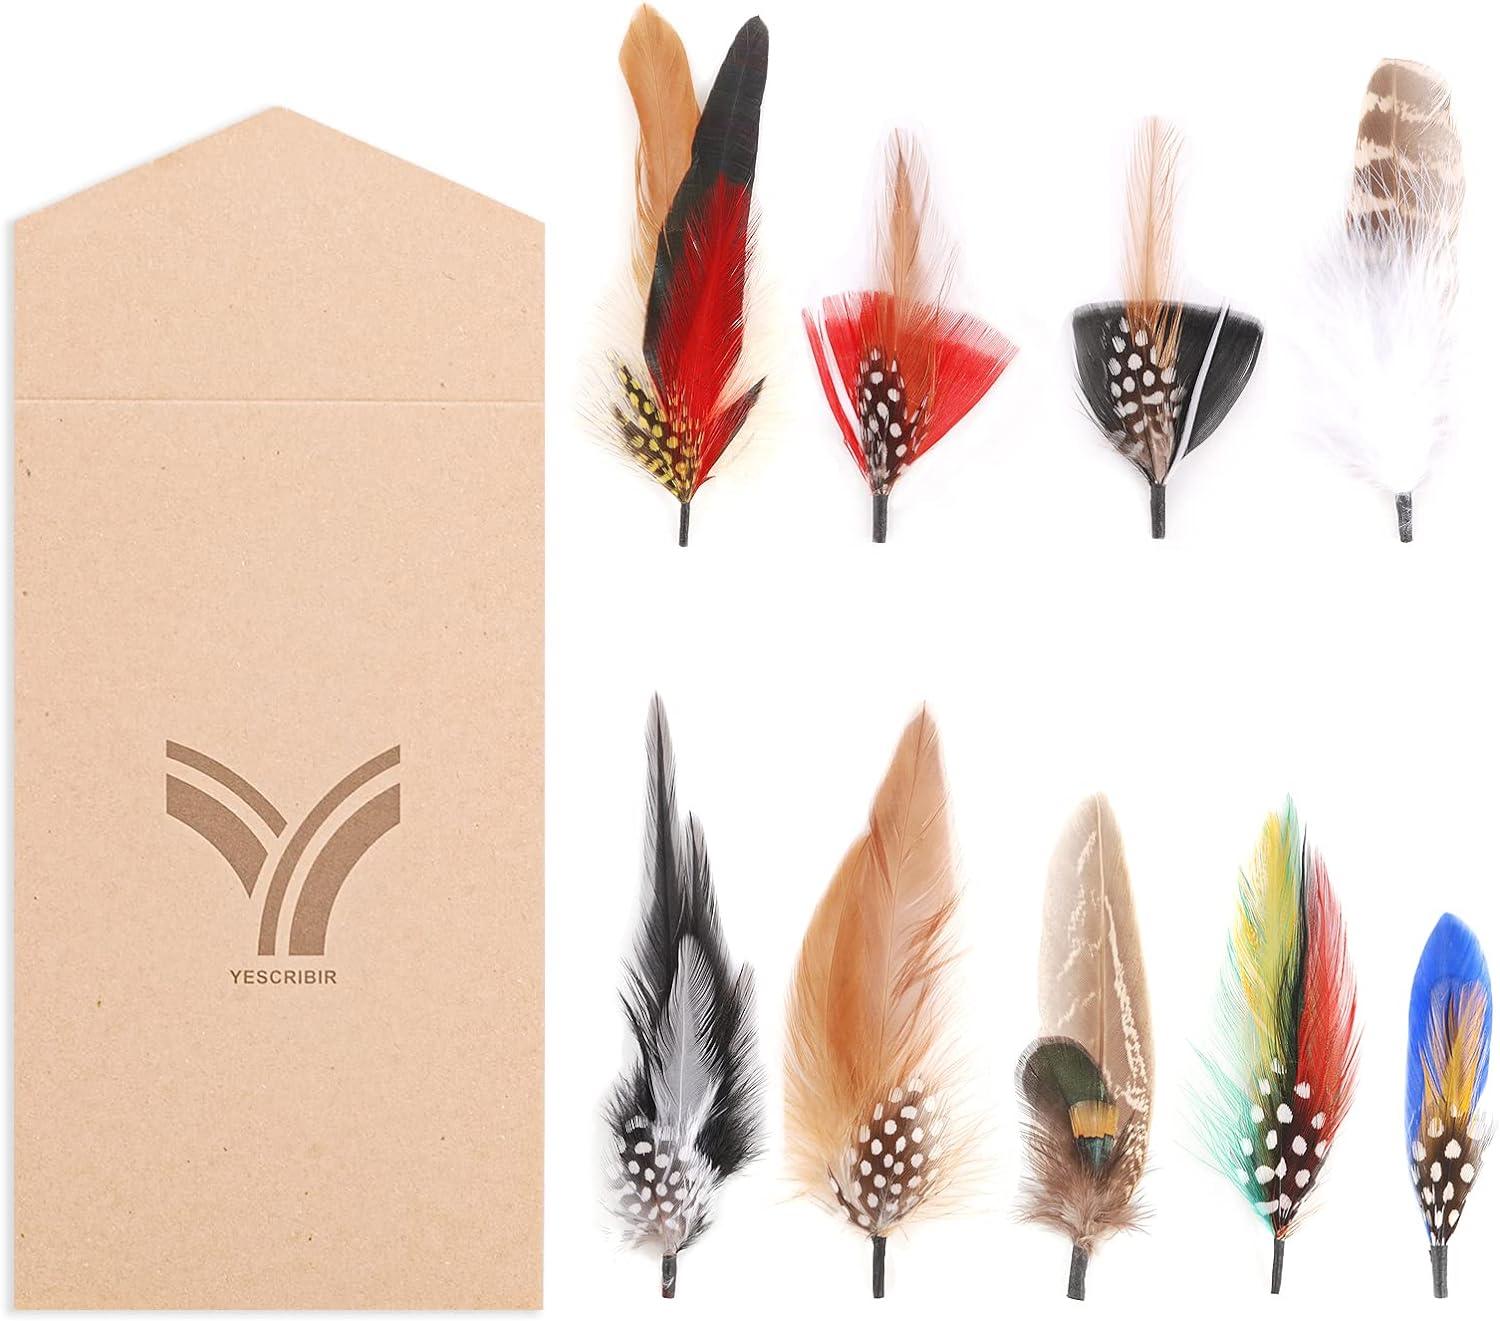 Hat Feathers, 10 Pcs Assorted Natural Feather Packs Accessories for Fedora,  Cowboy, Open Road, Borges, Scott, Trilby Hats (9 Pcs-3)